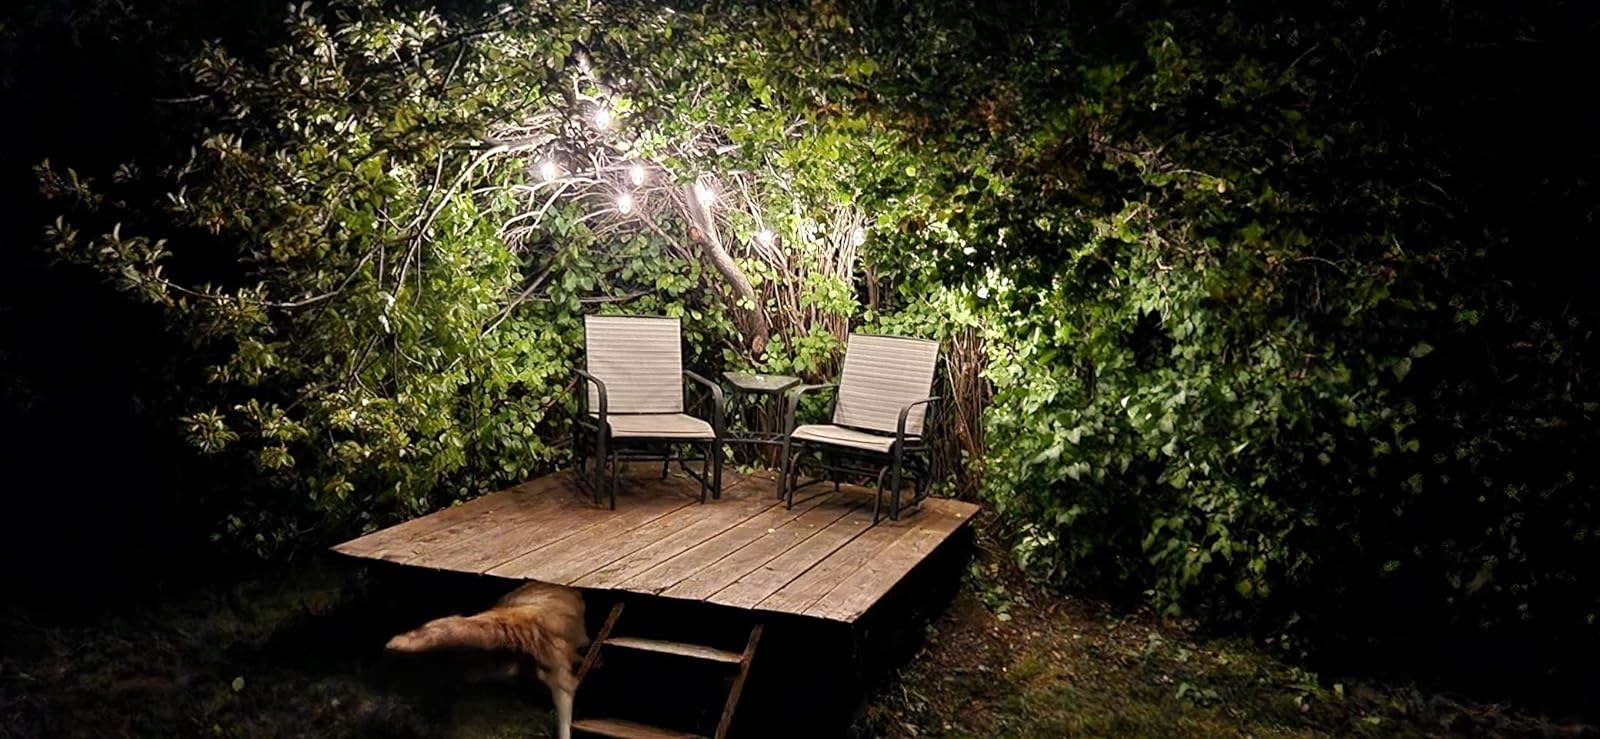 A well-lit wooden deck at night with two chairs surrounded by lush foliage, suggesting an outdoor furniture shopping context